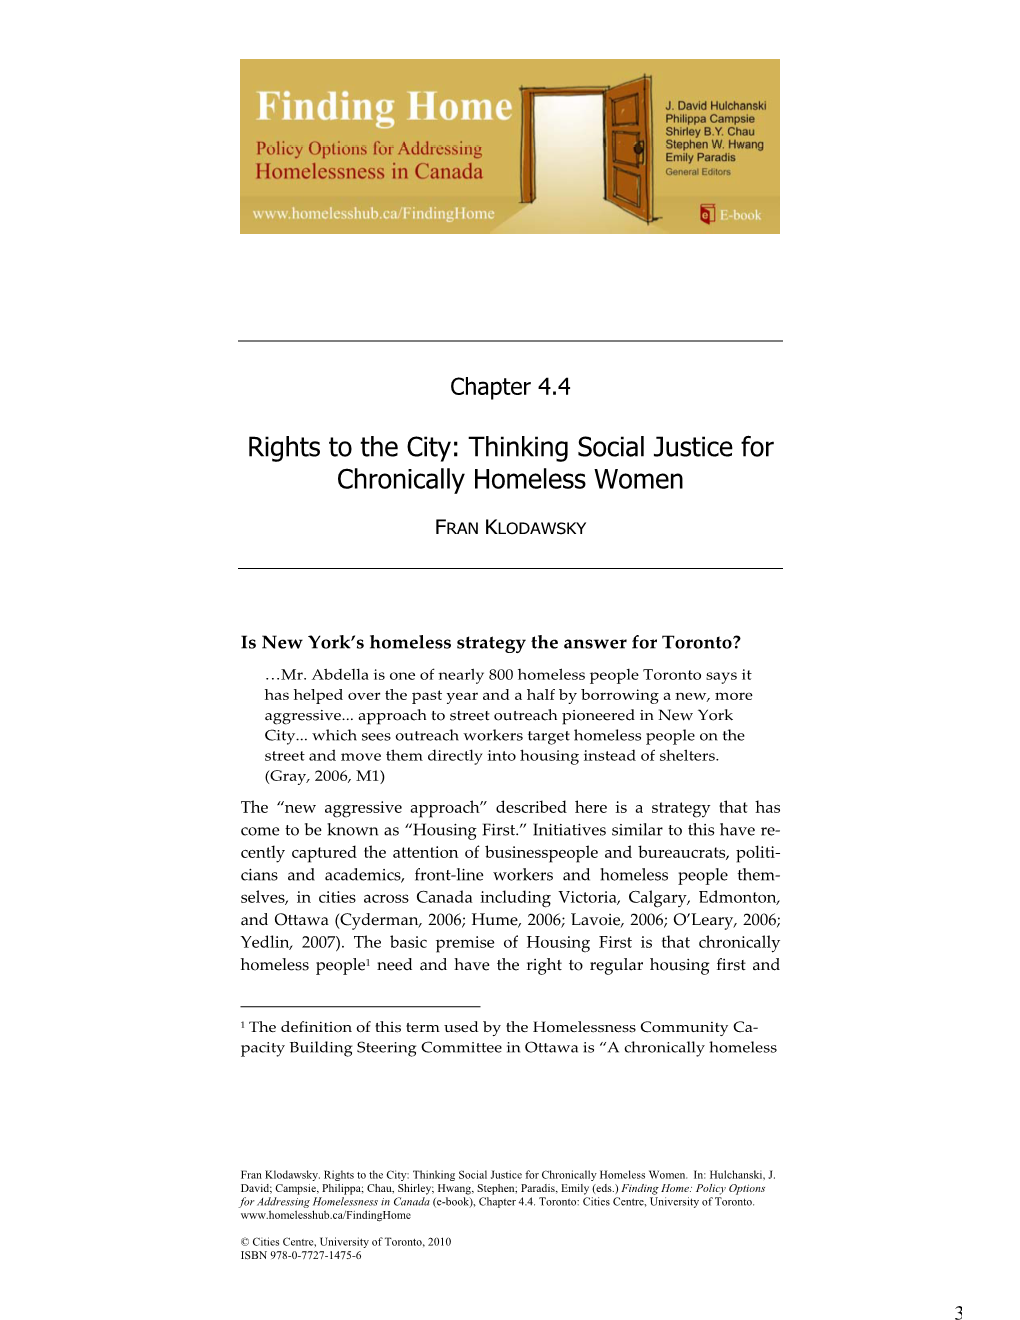 Rights to the City: Thinking Social Justice for Chronically Homeless Women